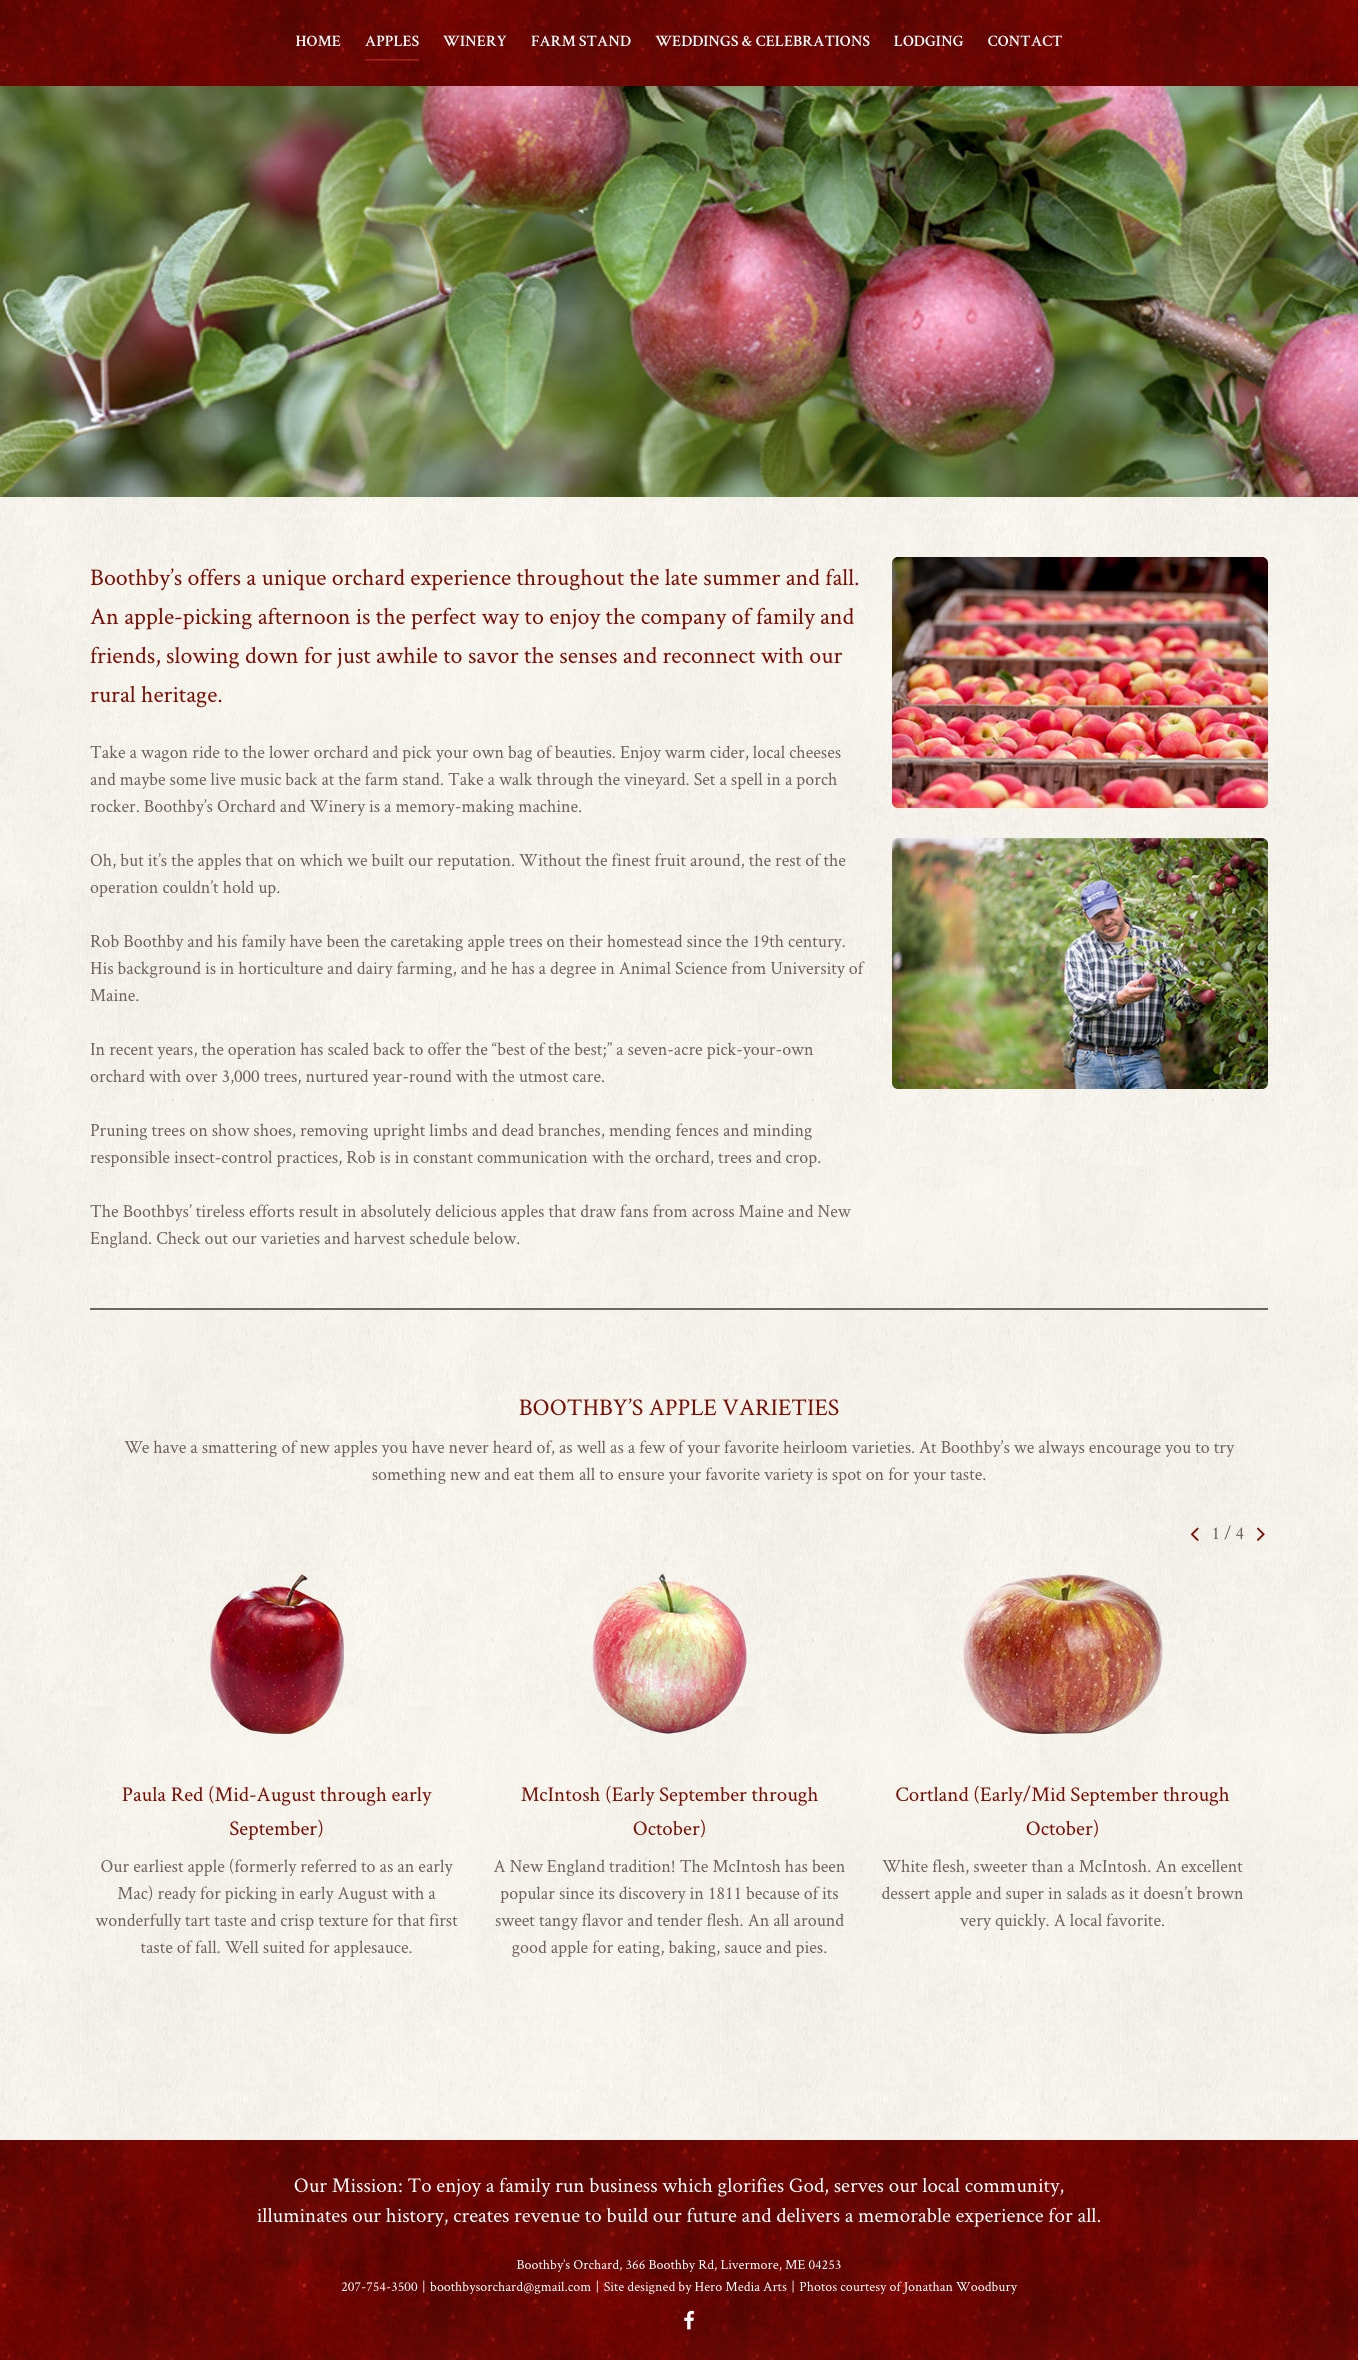 Boothbys Orchard Apples